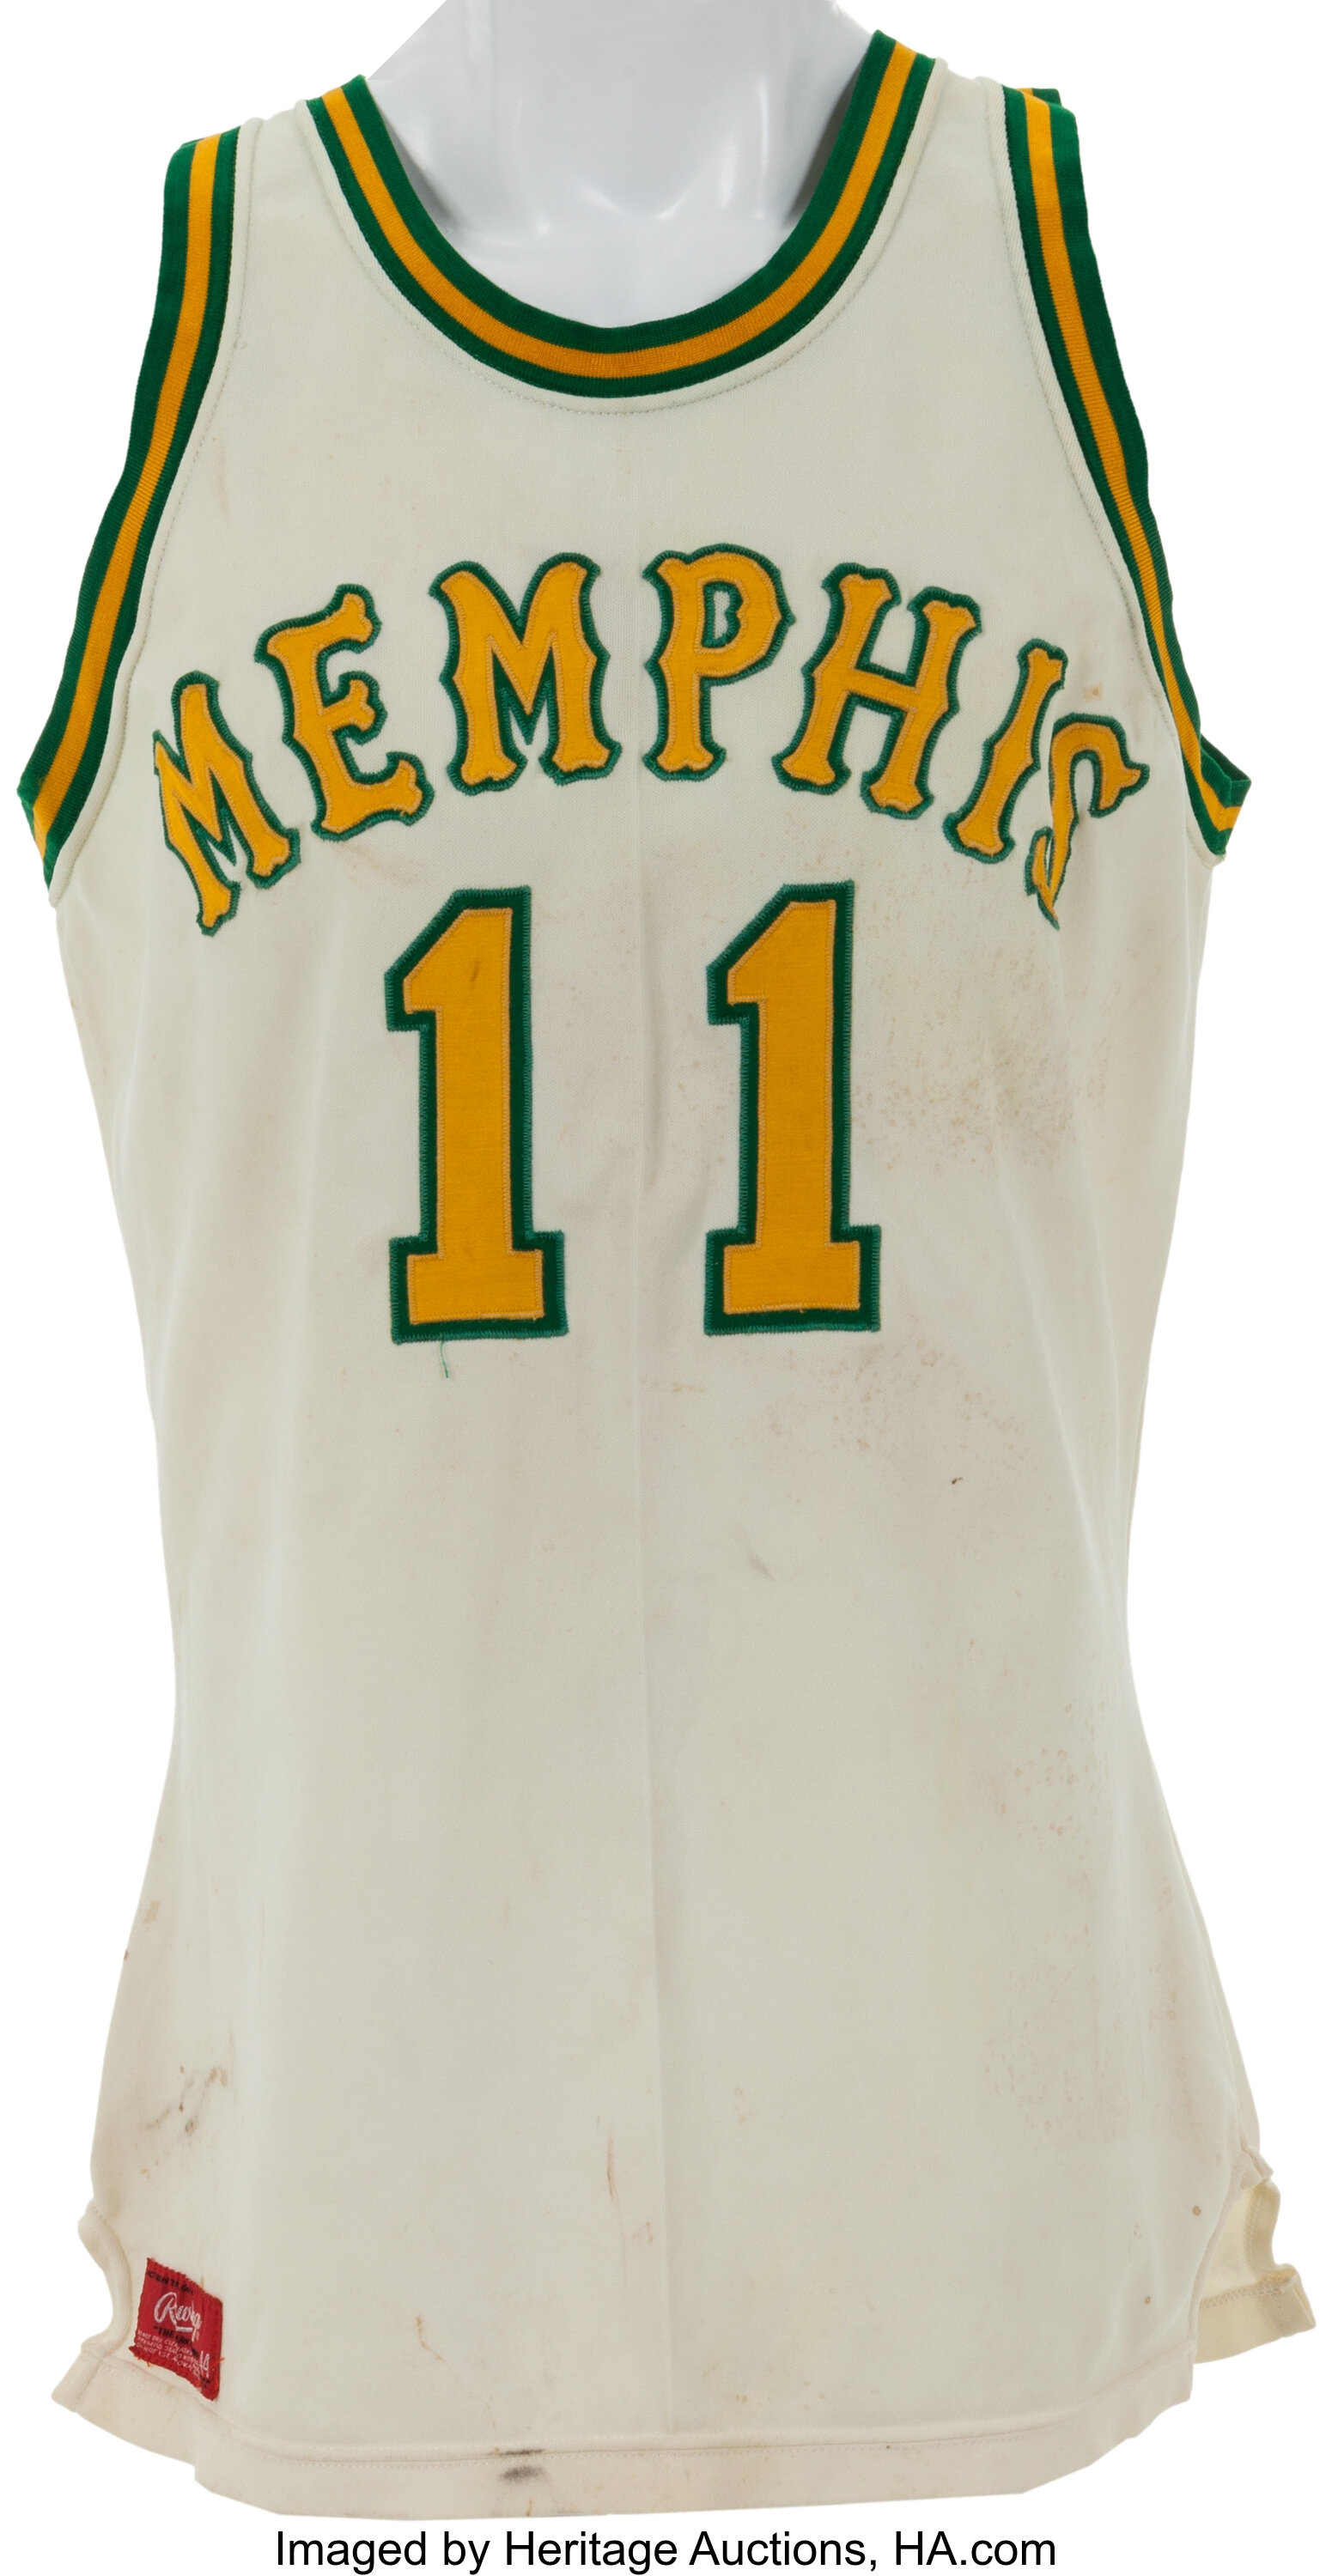 Memphis pays homage to its music history with City uniform